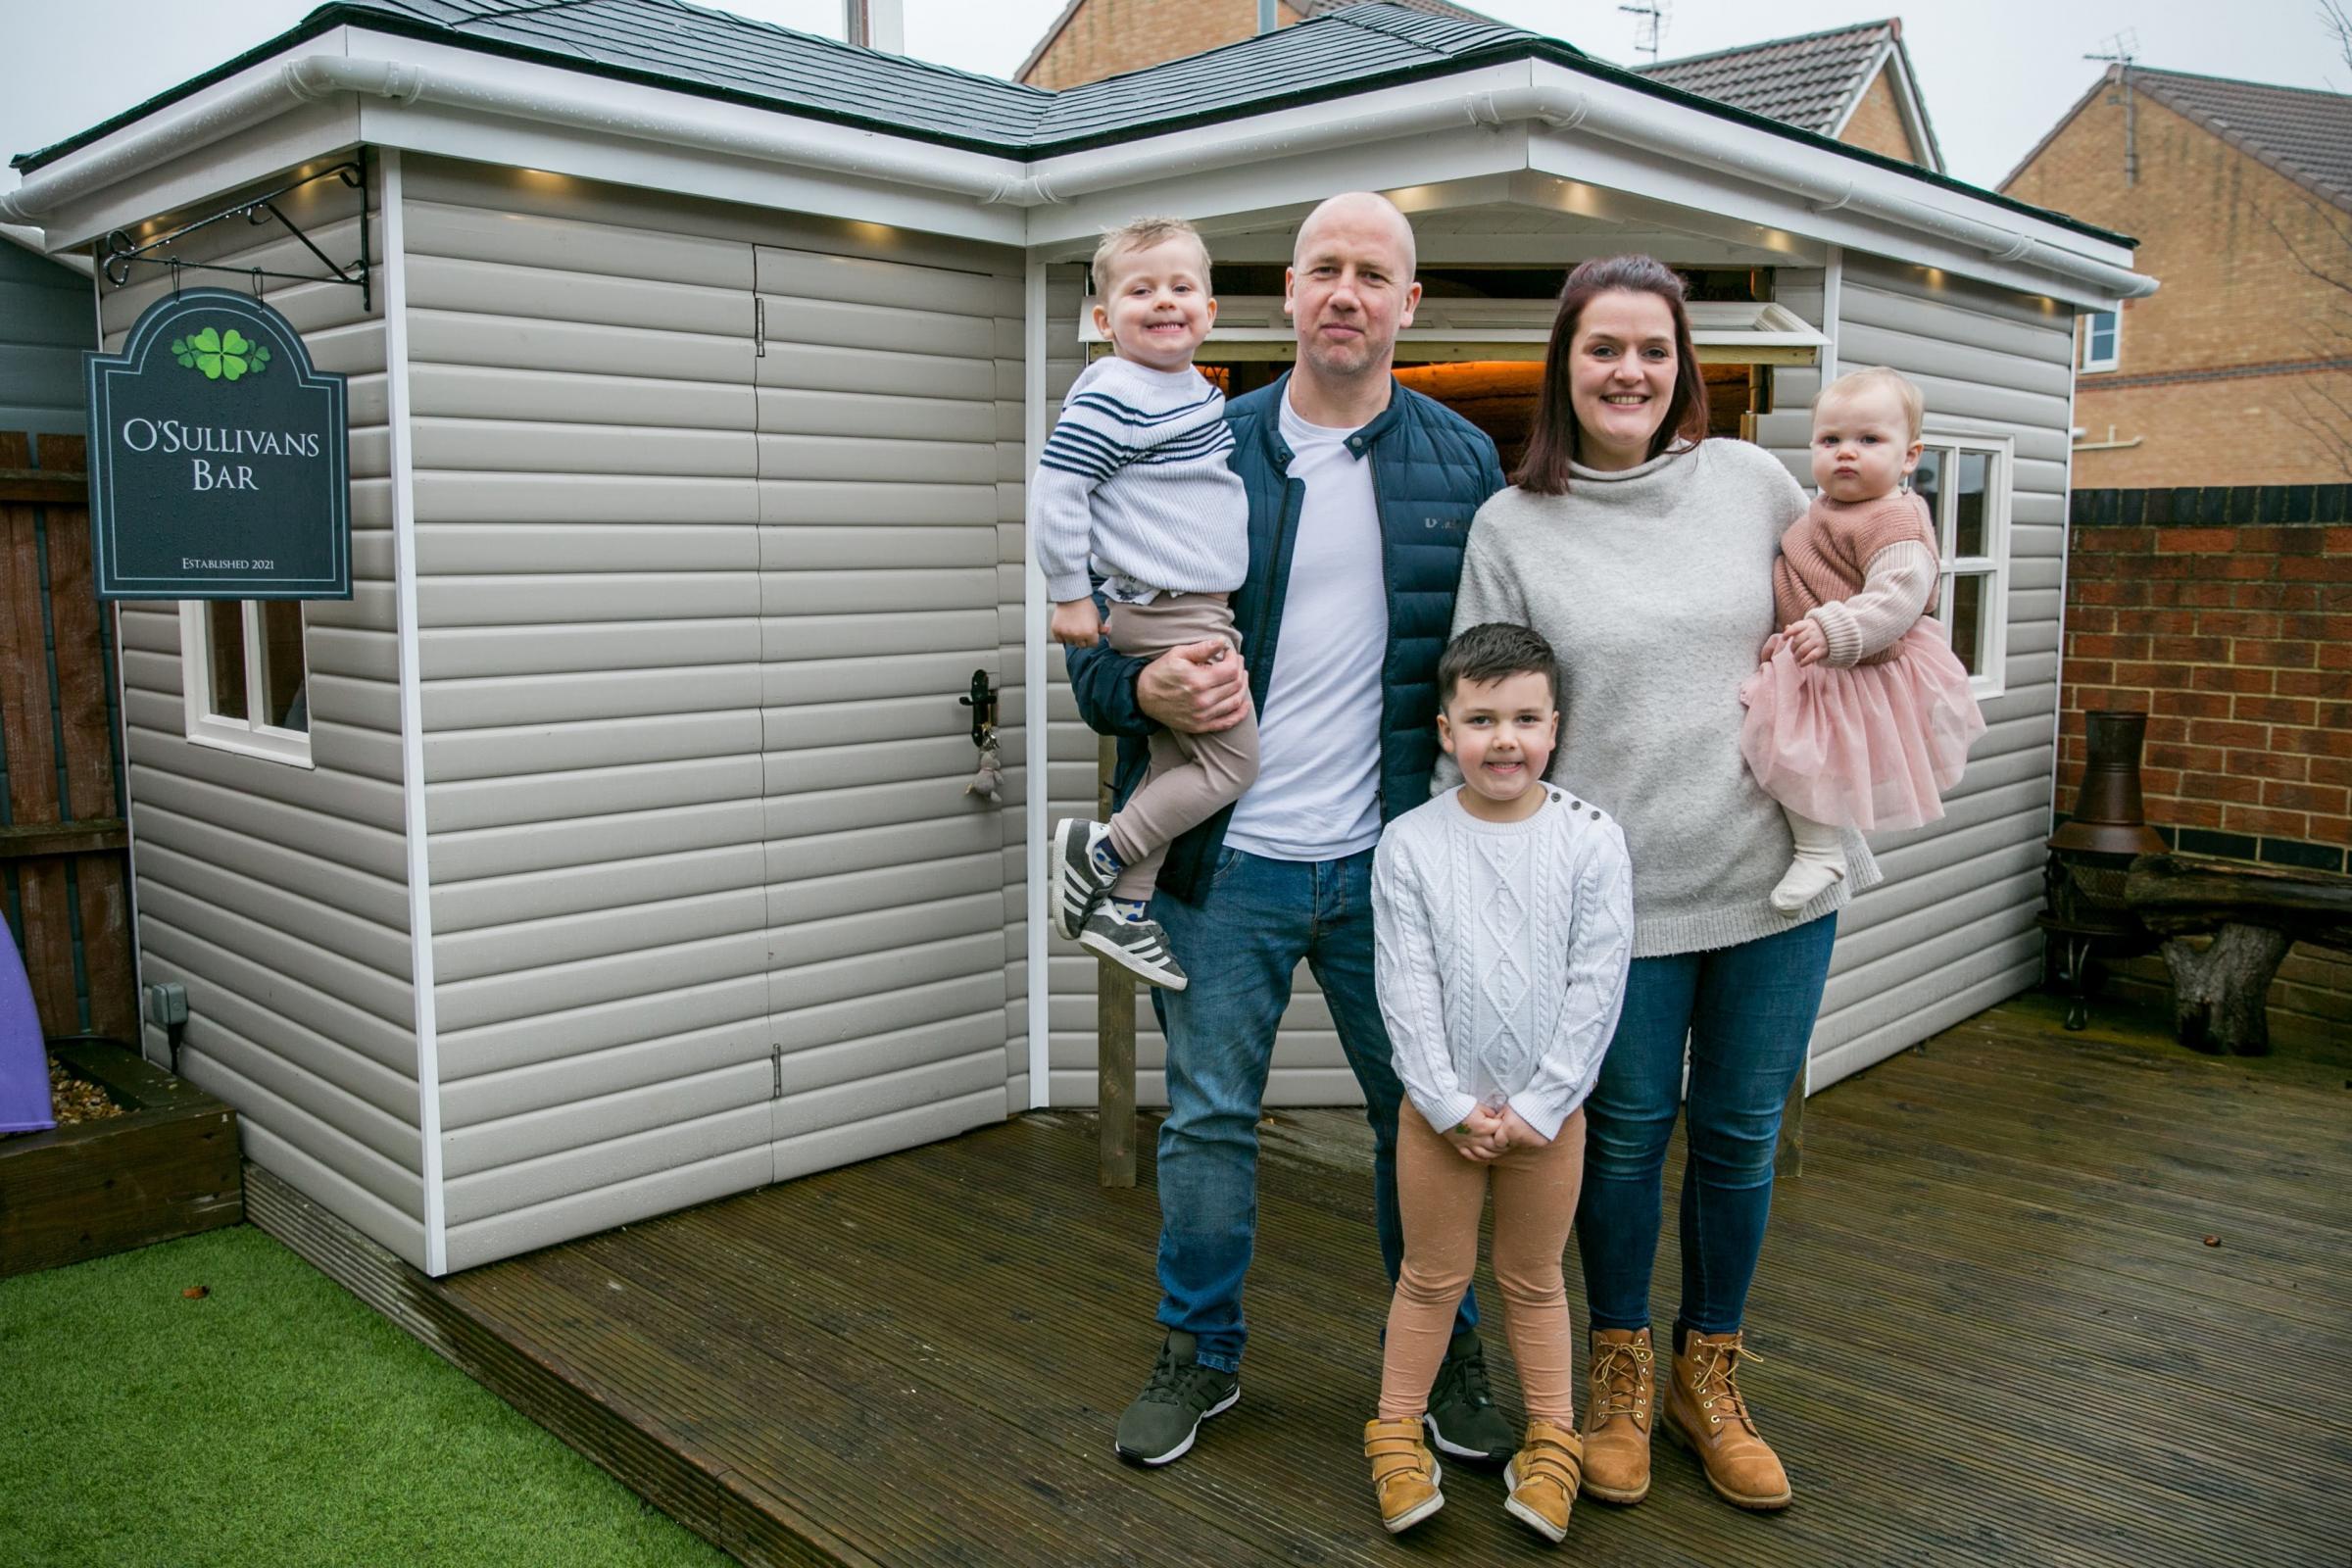 Shaun O’Sullivans shed came runner up in the Shed of the Year competition he is pictured with his wife, Alison, and their children Orla, one, Jaxon, three, and Colby, five Picture: SARAH CALDECOTT